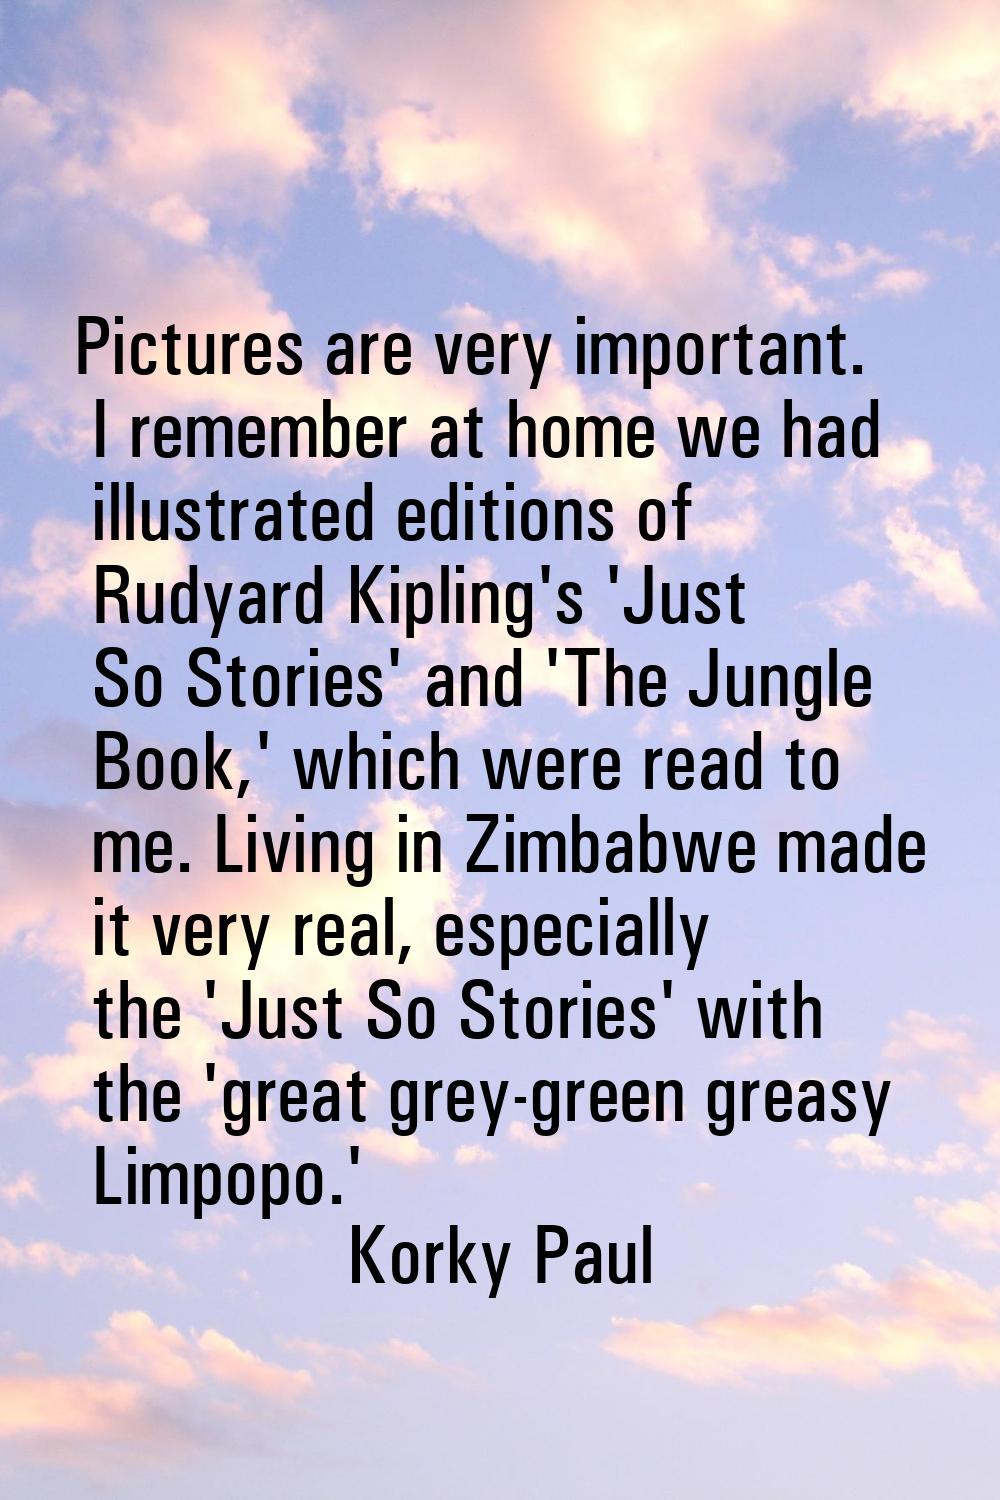 Pictures are very important. I remember at home we had illustrated editions of Rudyard Kipling's 'J